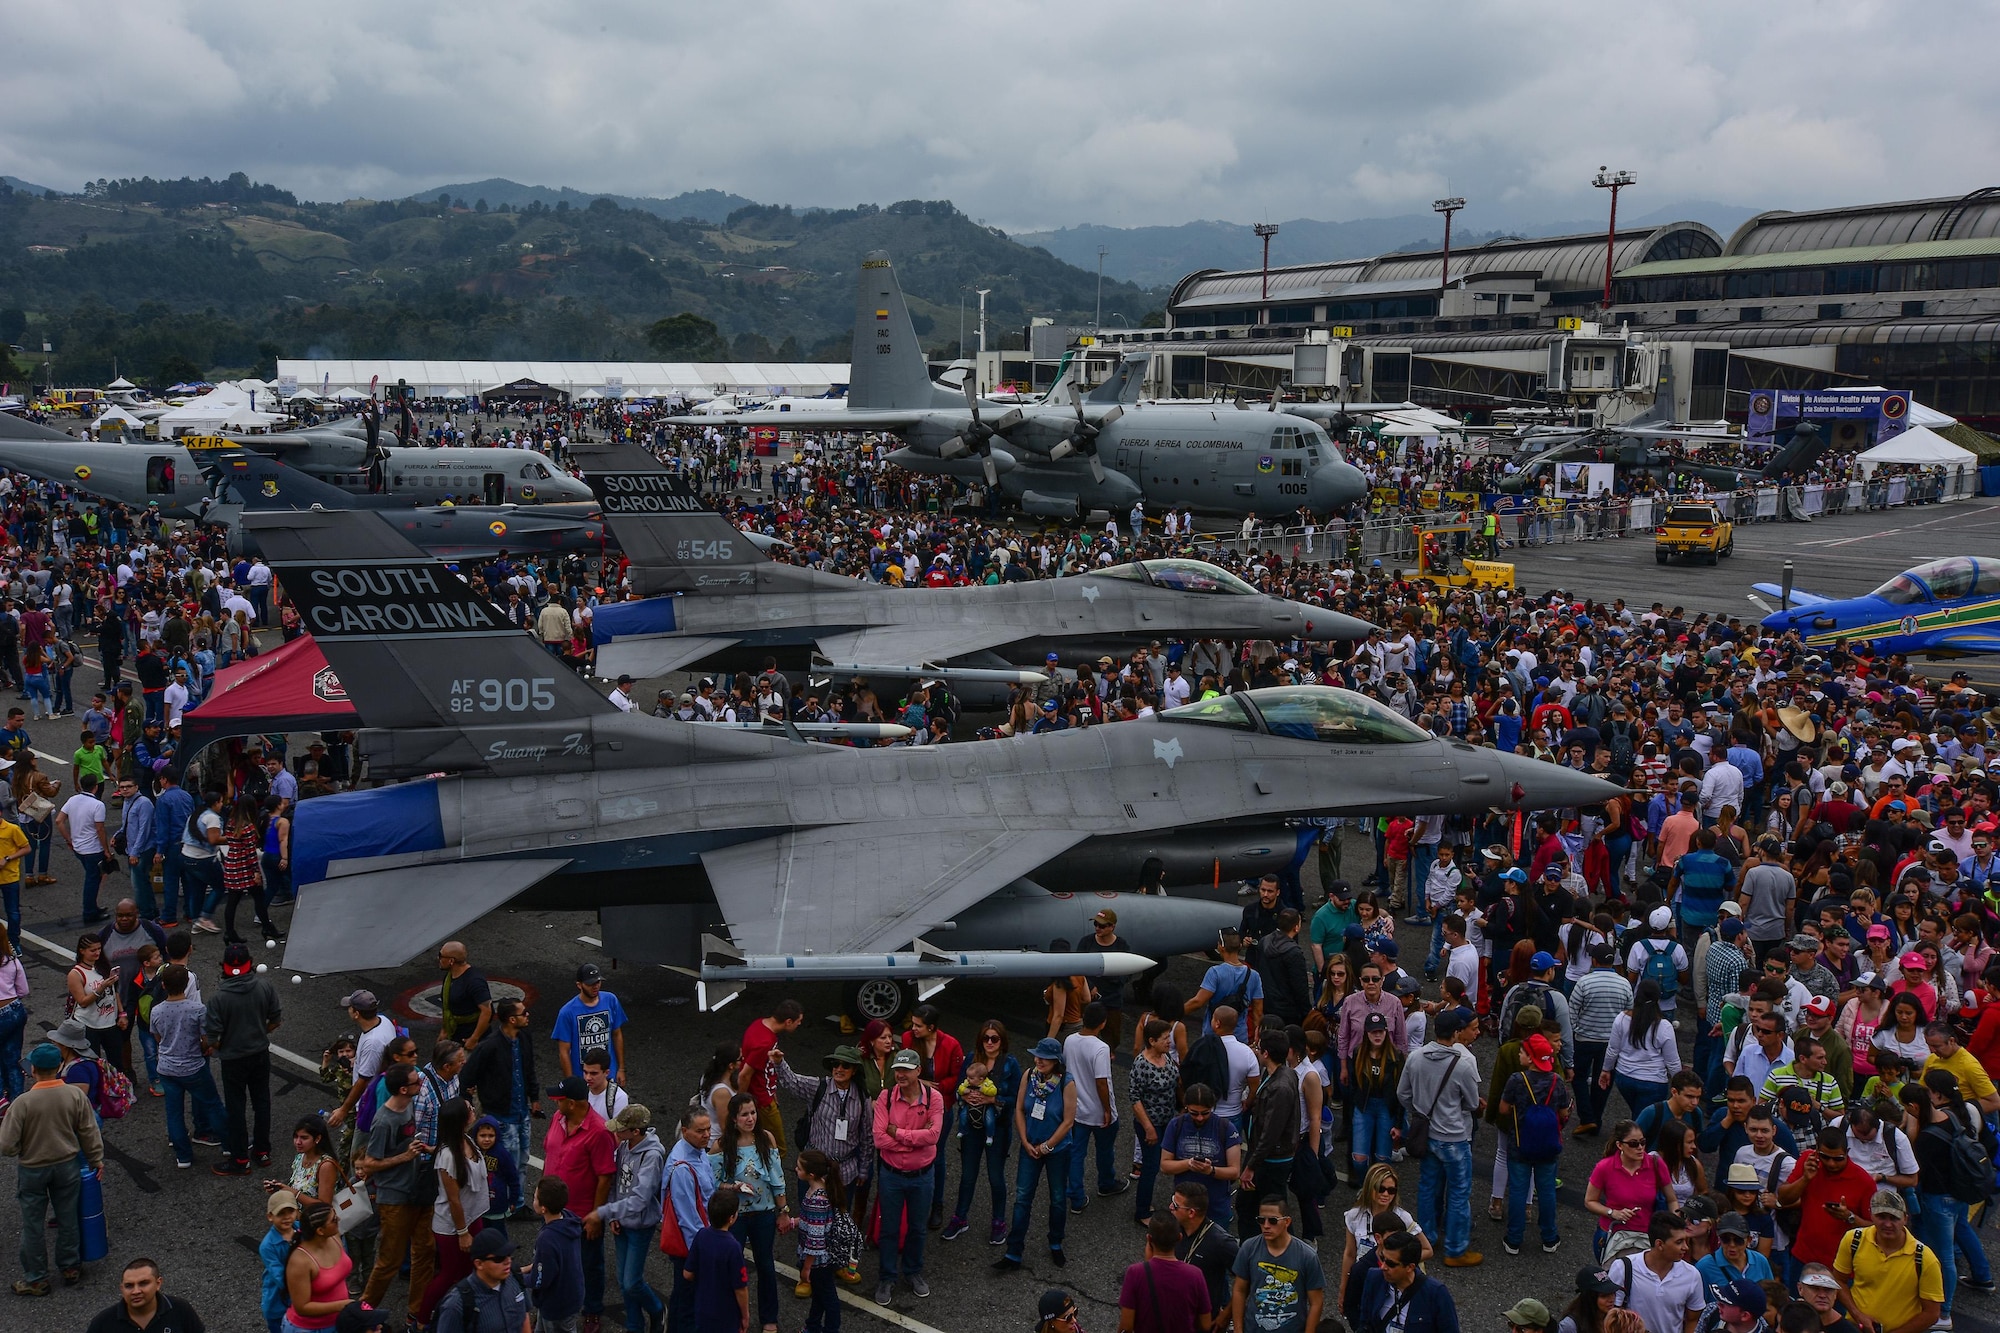 Guests watch the aerial demonstrations at José María Córdova International Airport during Feria Aeronautica Internacional—Colombia 2017 in Rionegro, Colombia, July 15, 2017. The United States Air Force is participating in the four-day air show with two South Carolina Air National Guard F-16s as static displays, plus many other displays. 